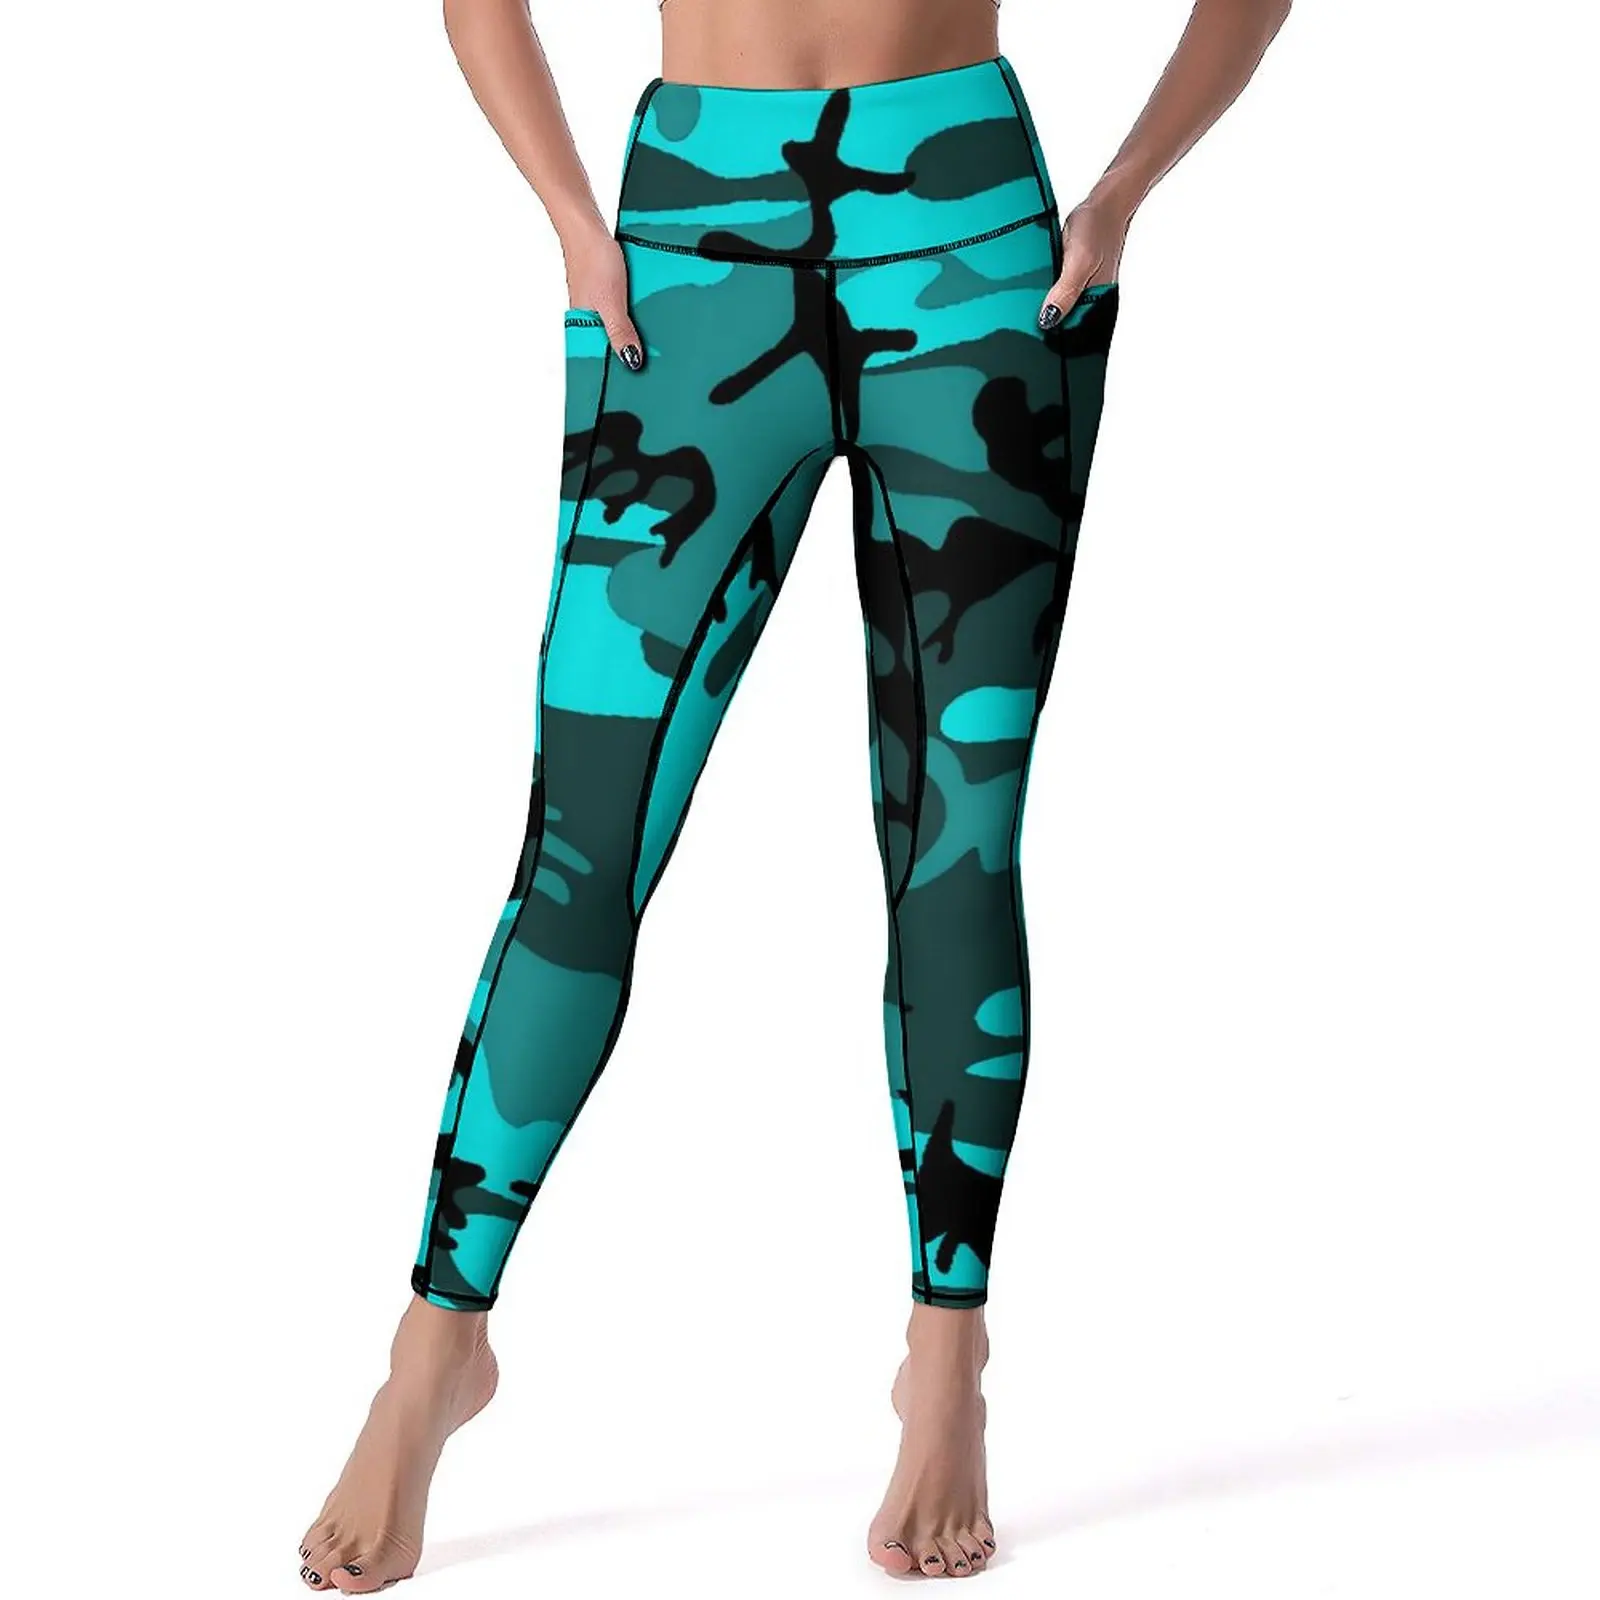 

Blue Camo Leggings With Pockets Camouflage Print Design Yoga Pants Push Up Gym Yoga Legging Lady Aesthetic Stretch Sports Tights